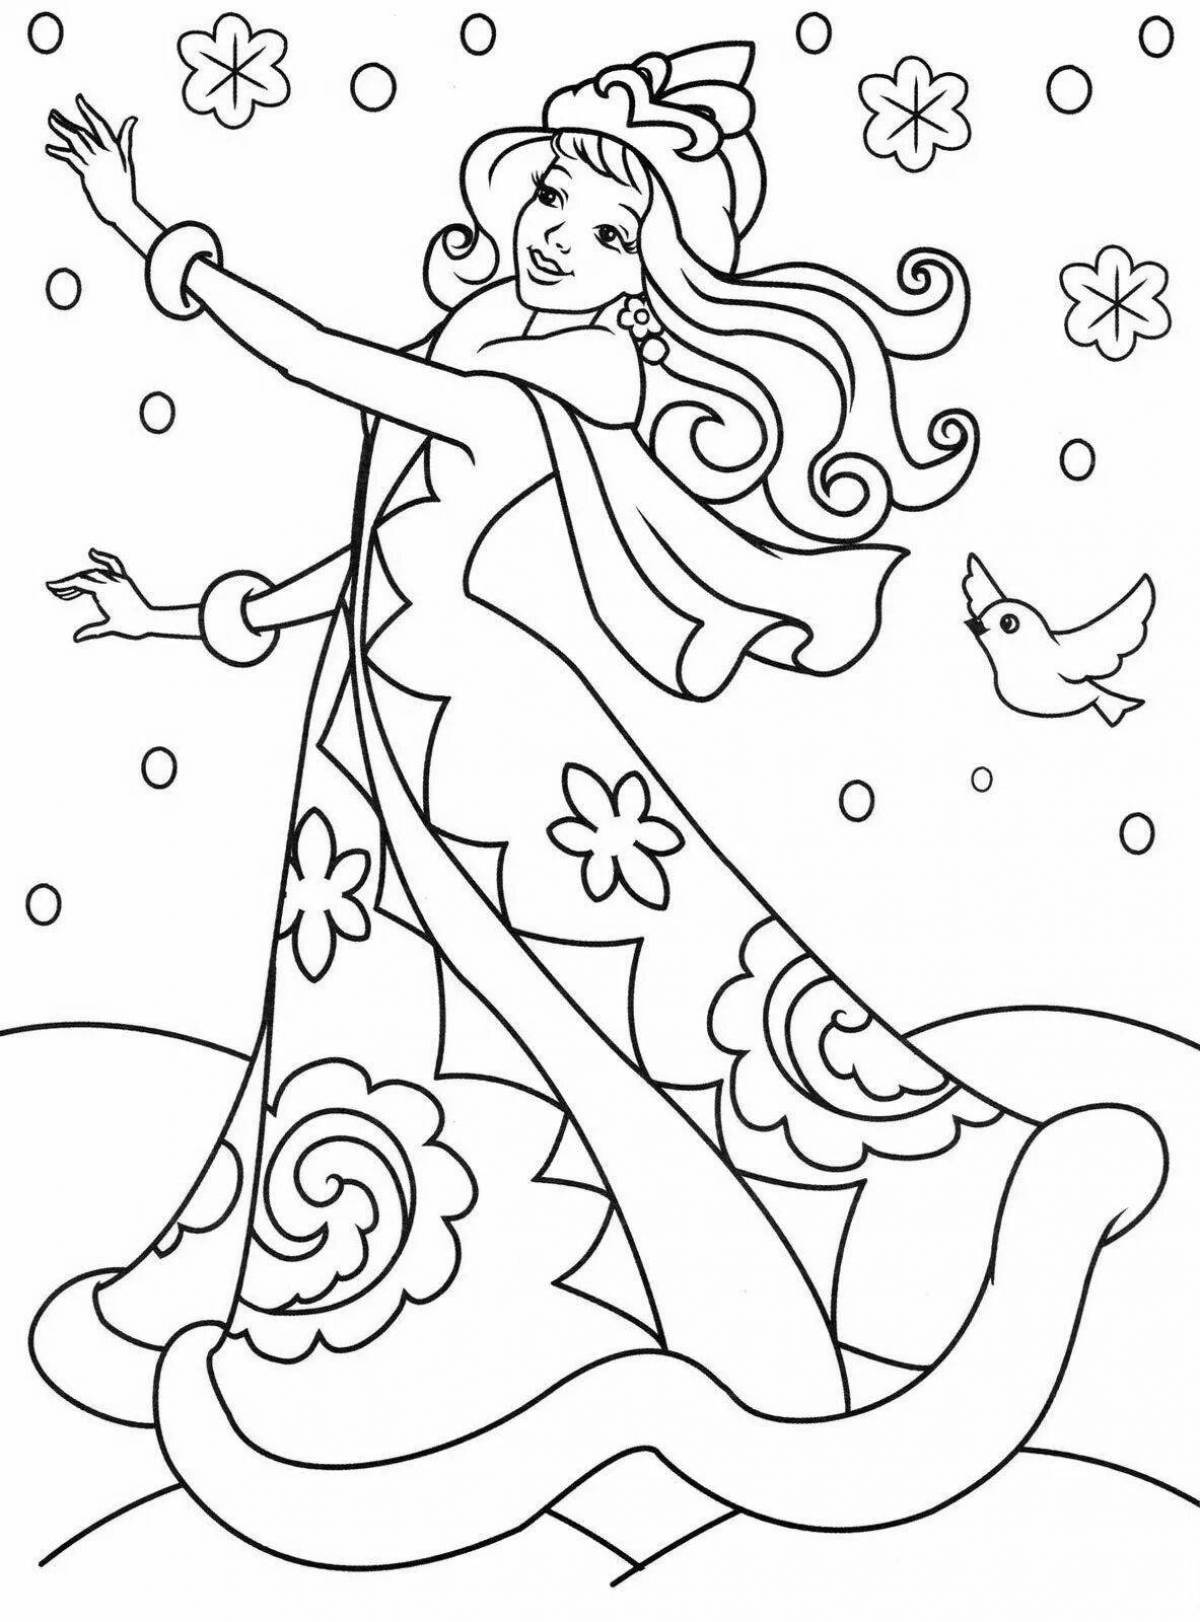 Fancy snow maiden coloring by numbers